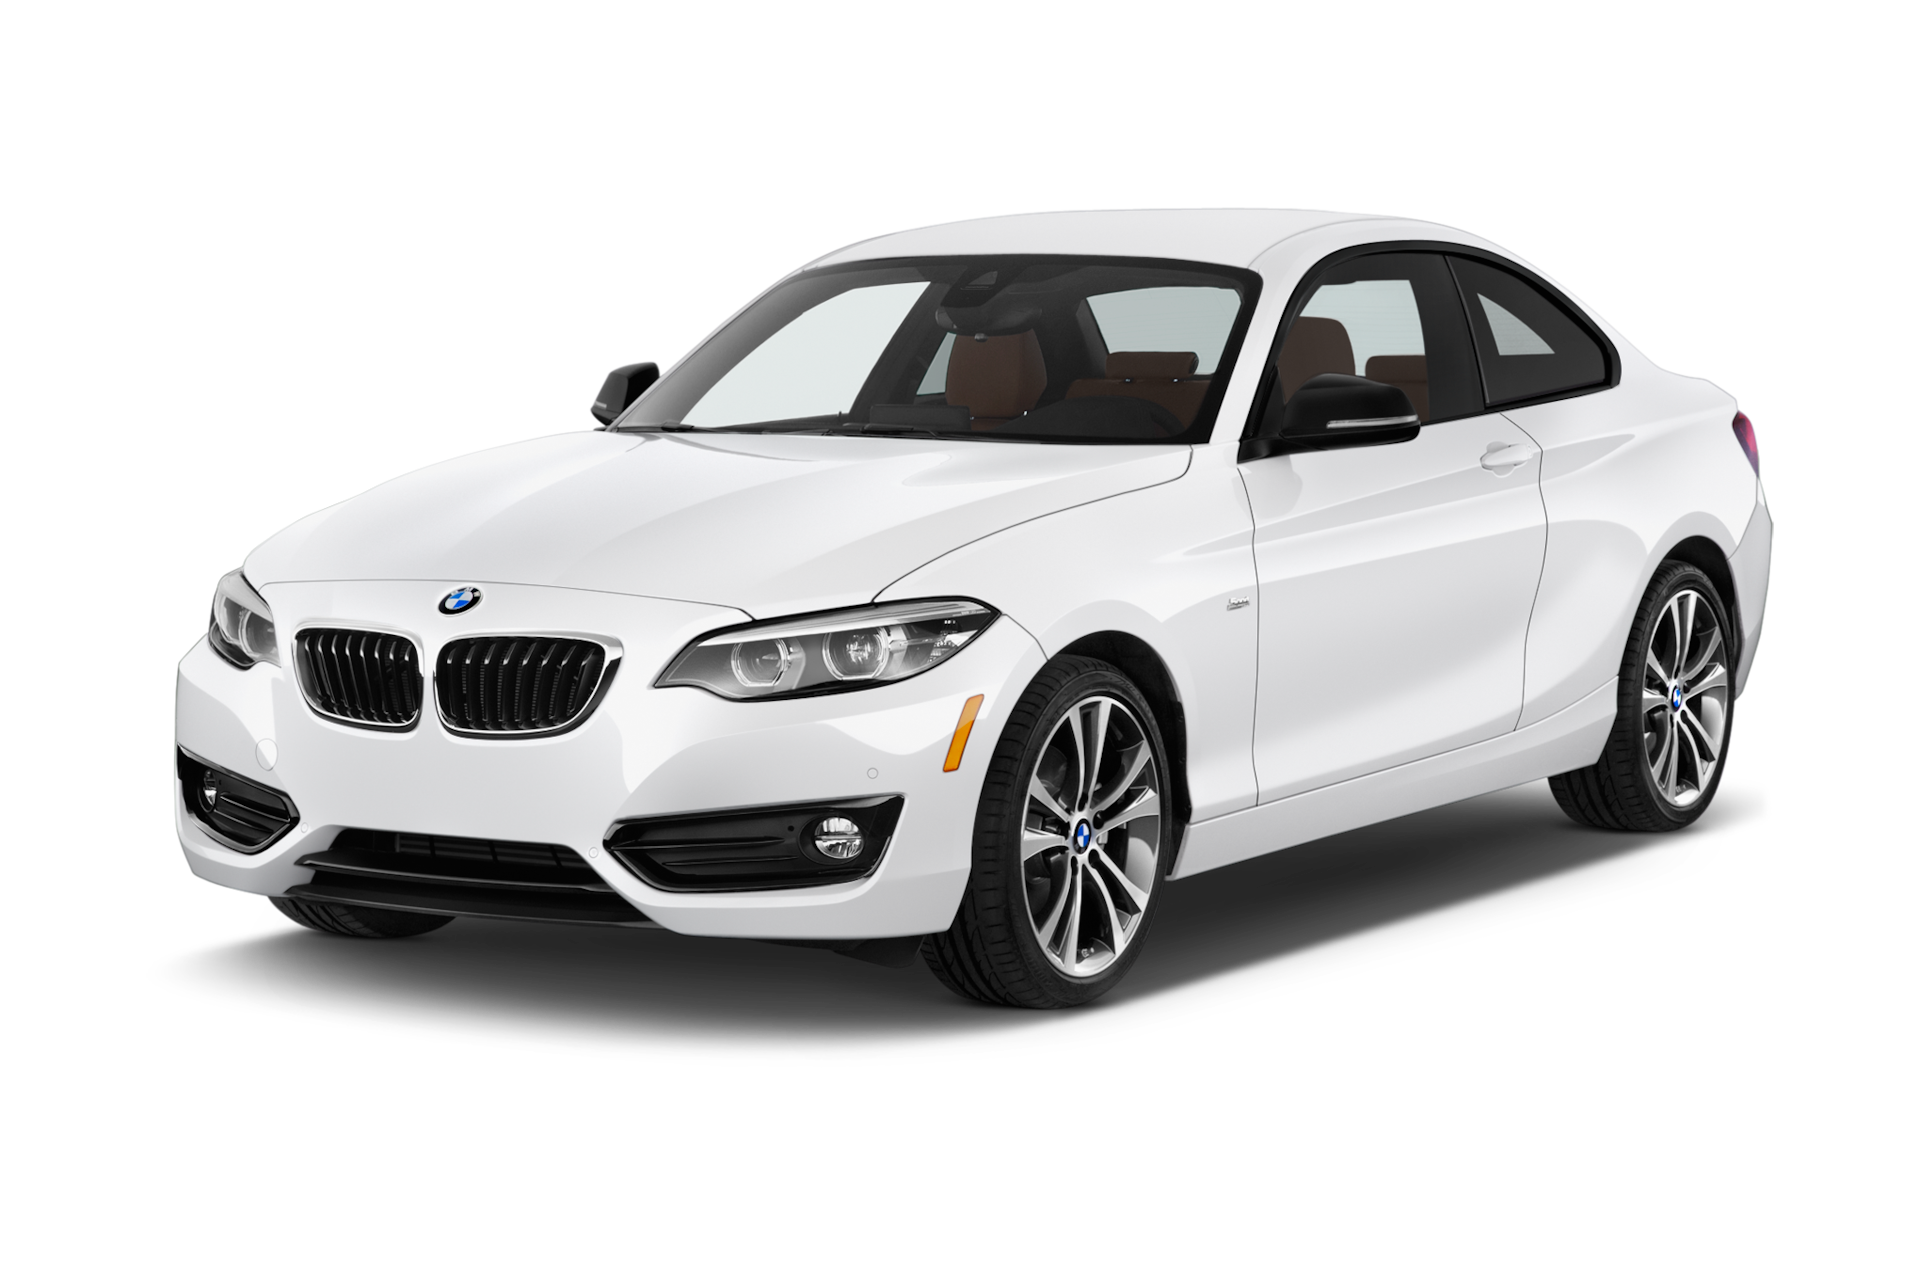 2018 BMW 2-Series Prices, Reviews, and Photos - MotorTrend